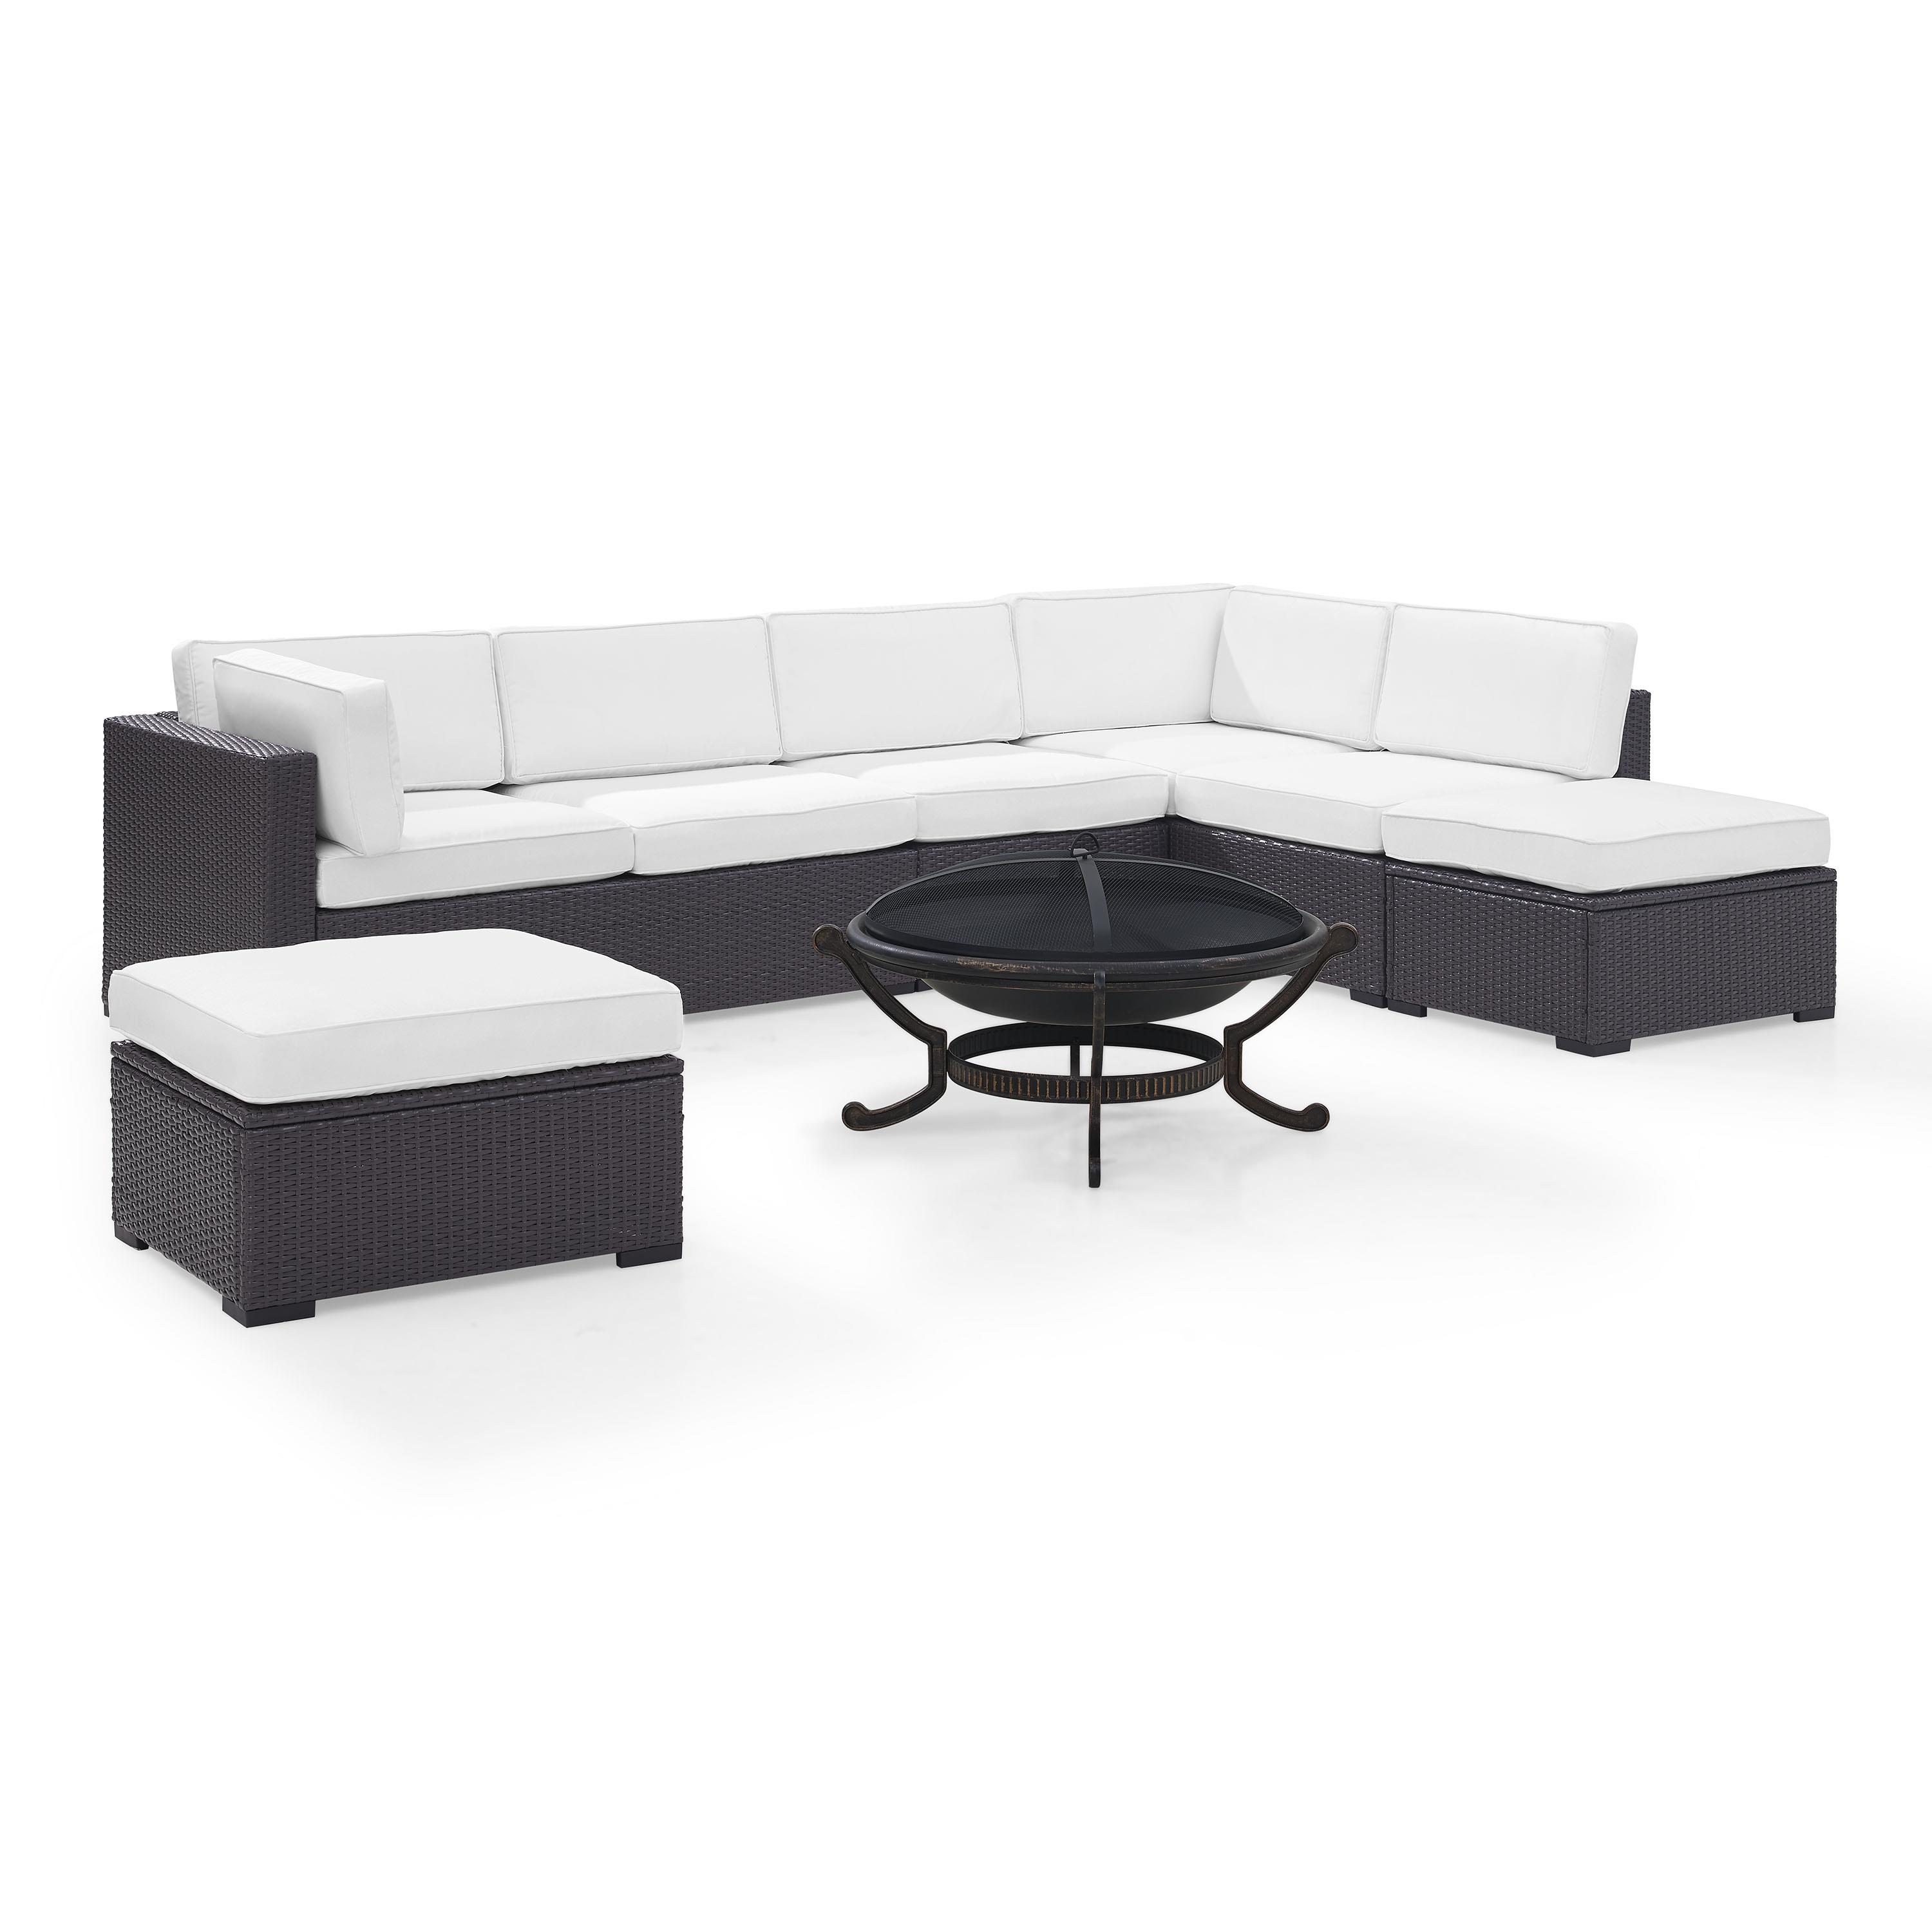 Crosley Furniture Biscayne 6 Piece Wicker Outdoor Sectional Set with Firepit - image 4 of 4